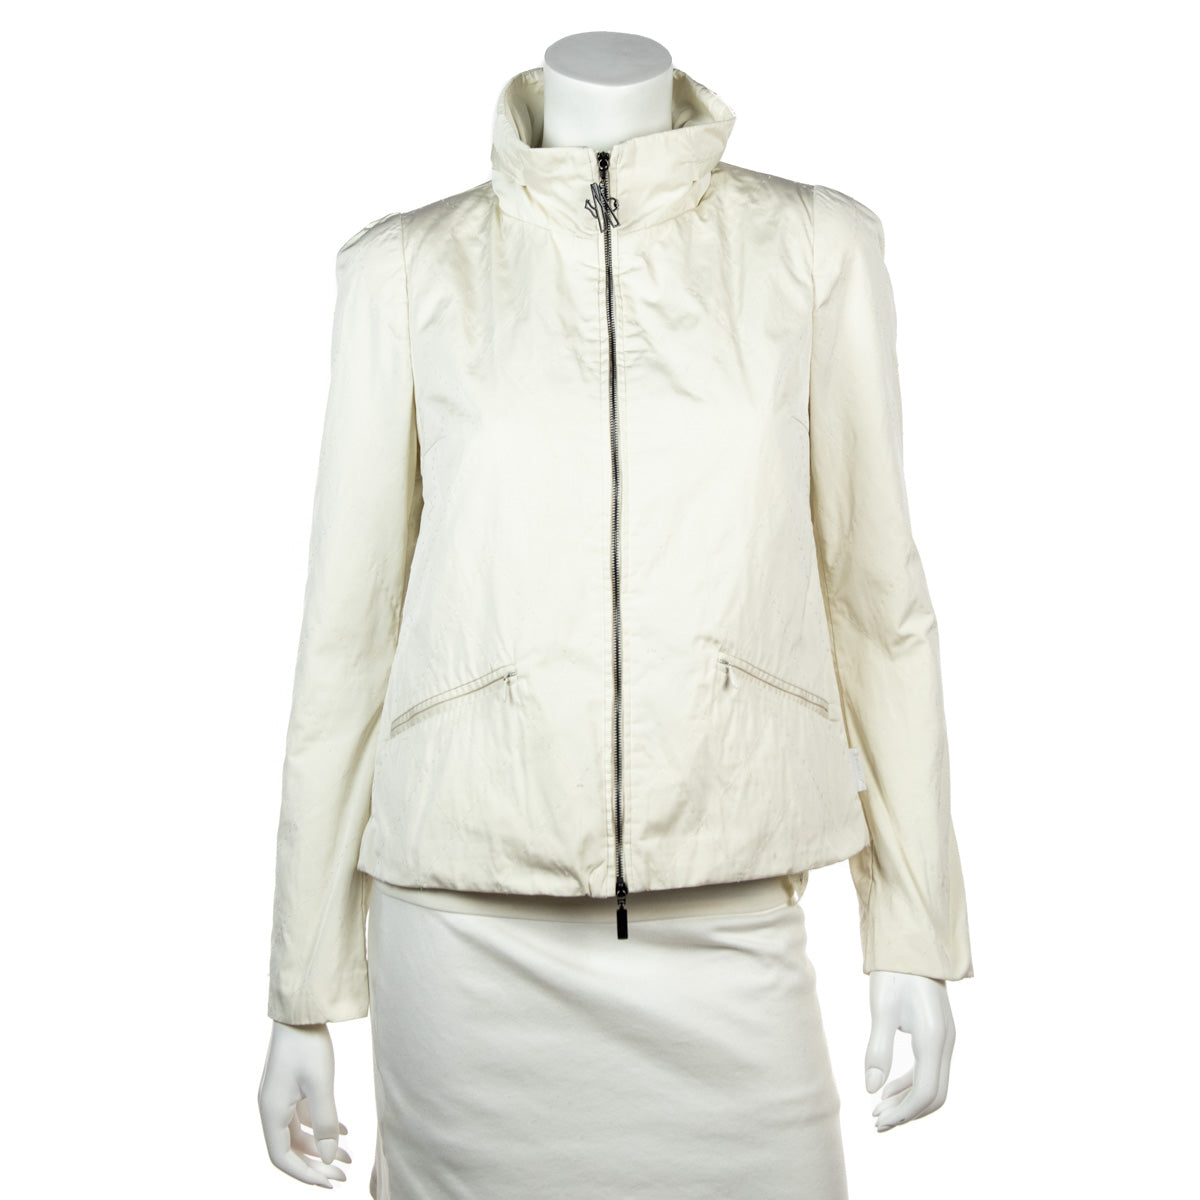 Moncler White Rain Jacket with Scarf Size M | 2 - Love that Bag etc - Preowned Authentic Designer Handbags & Preloved Fashions